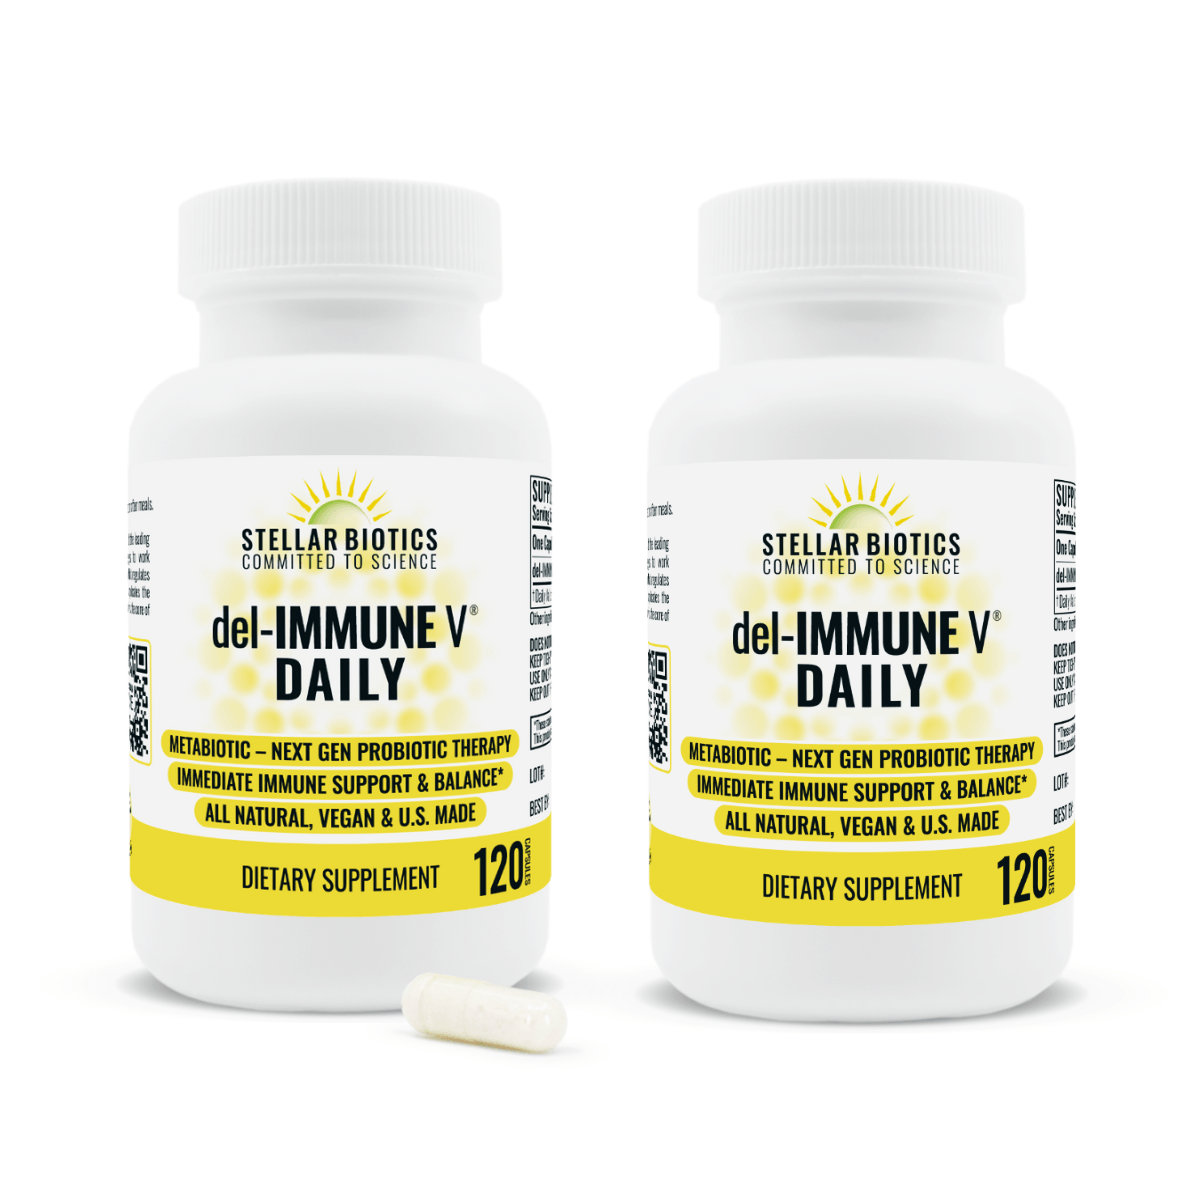 Maintain bundle contains two 120-capsule bottles of the metabiotic, del-IMMUNE V DAILY